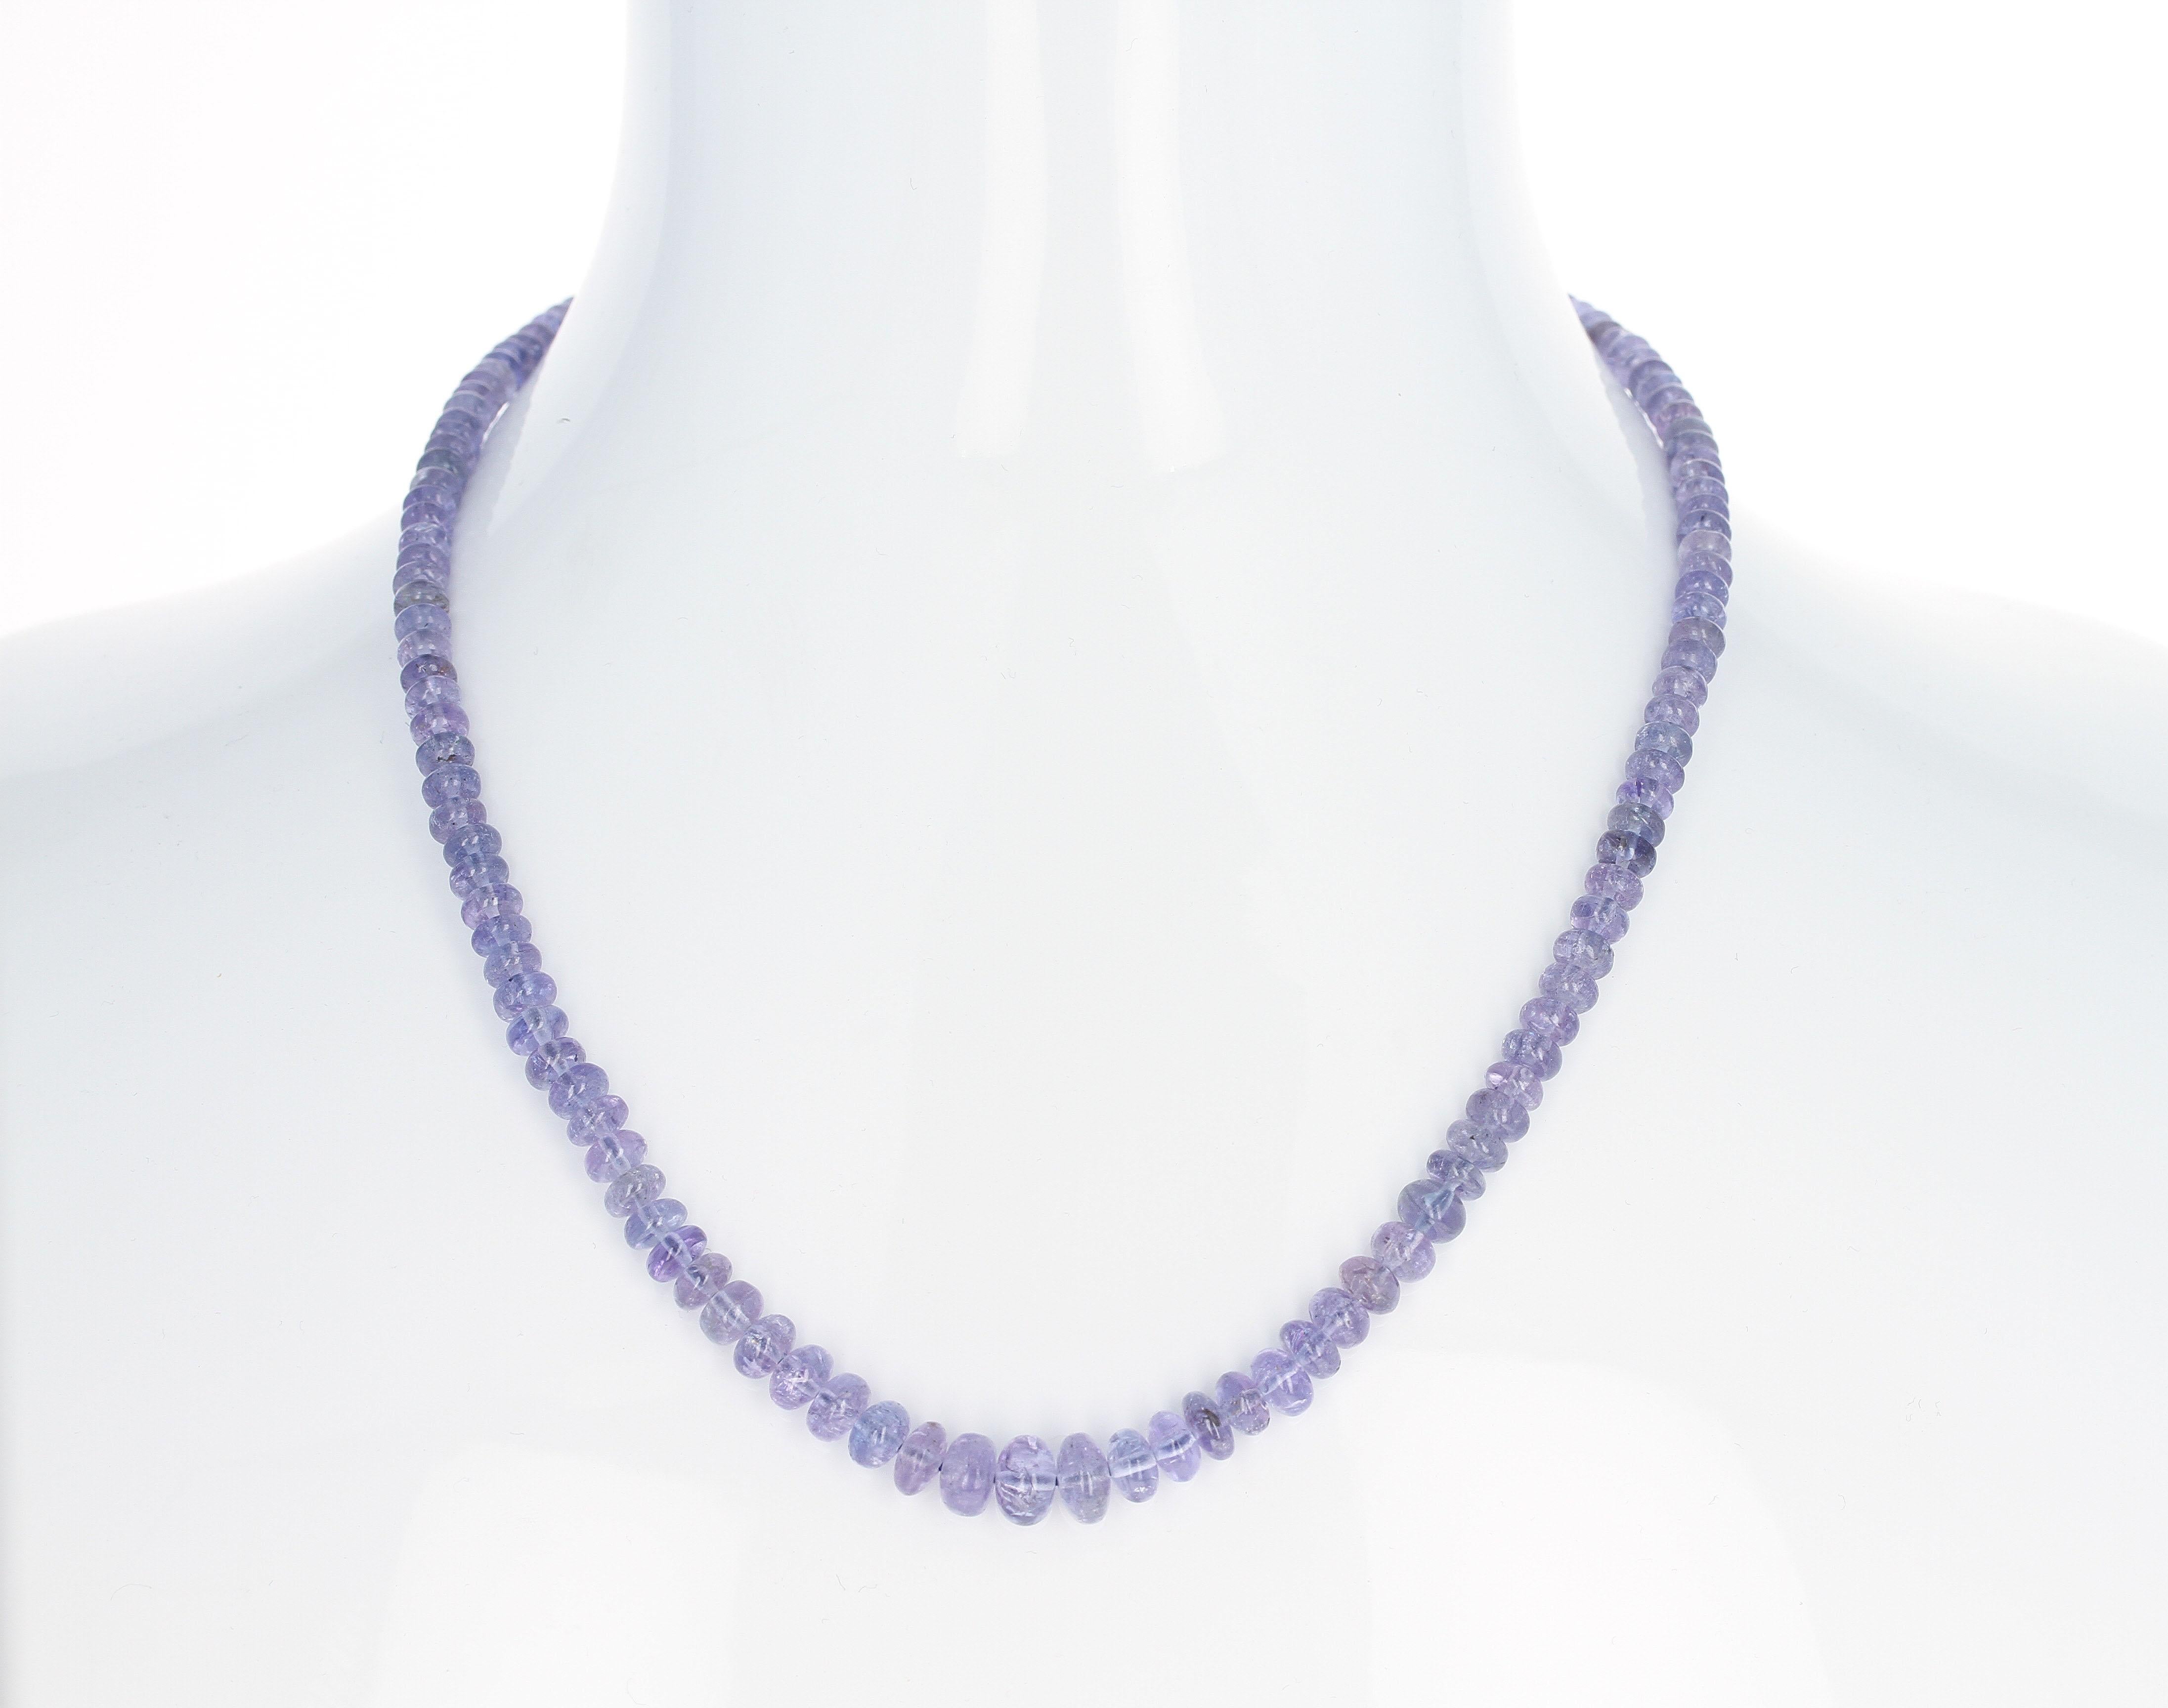 A strand of Genuine Tanzanite Smooth Beads with a Sterling Silver Toggle Clasp. Length: 20.